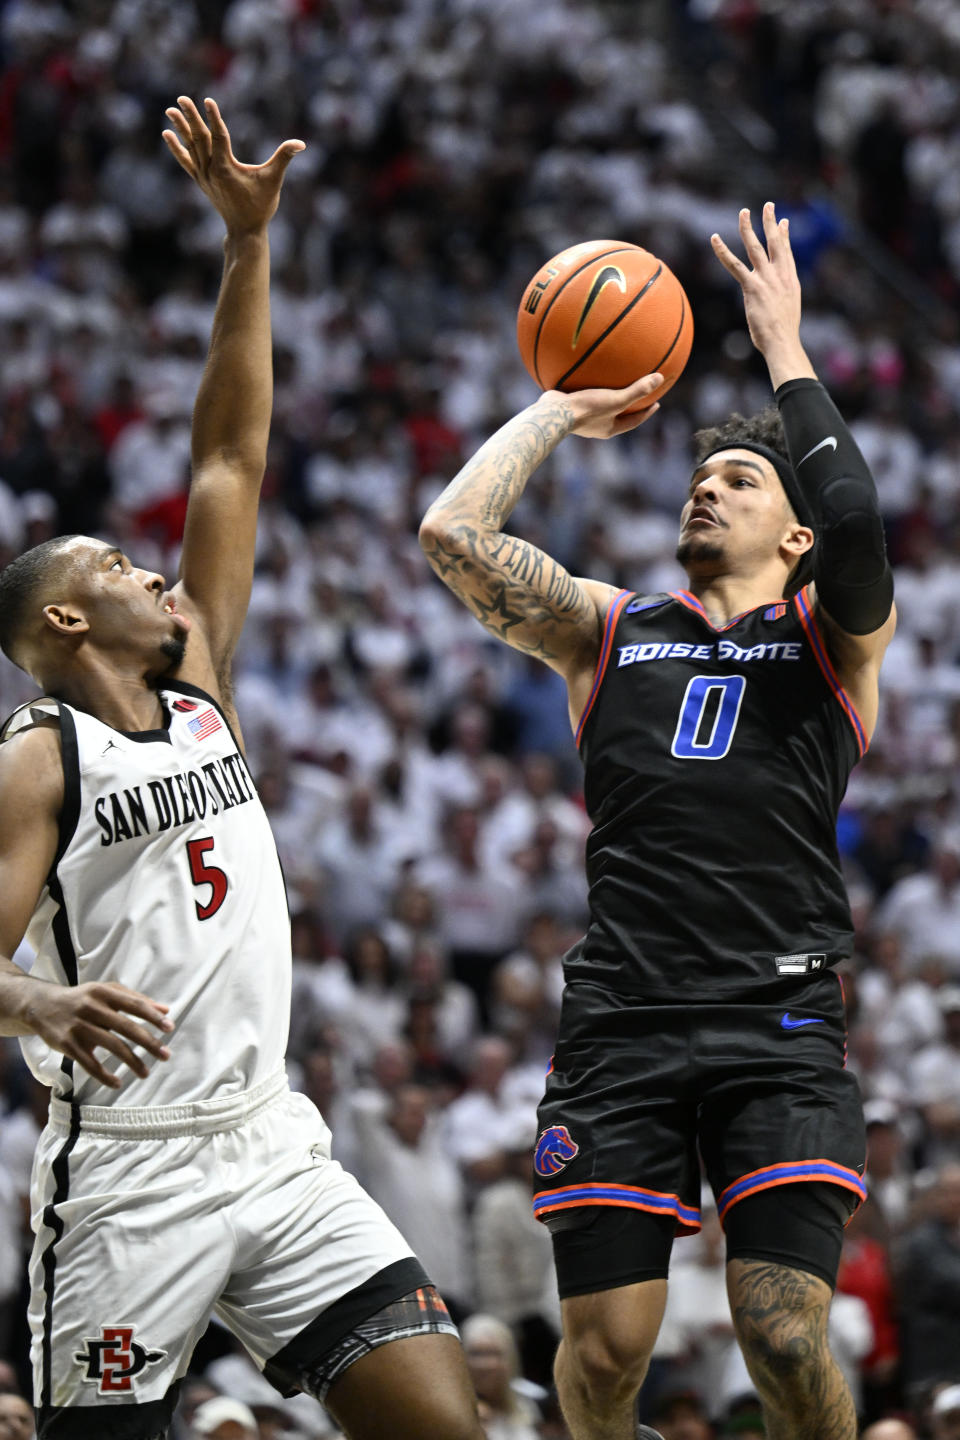 Boise State guard Roddie Anderson III (0) shoots over San Diego State guard Lamont Butler (5) during the second half of an NCAA college basketball game Friday, March 8, 2024, in San Diego. (AP Photo/Denis Poroy)